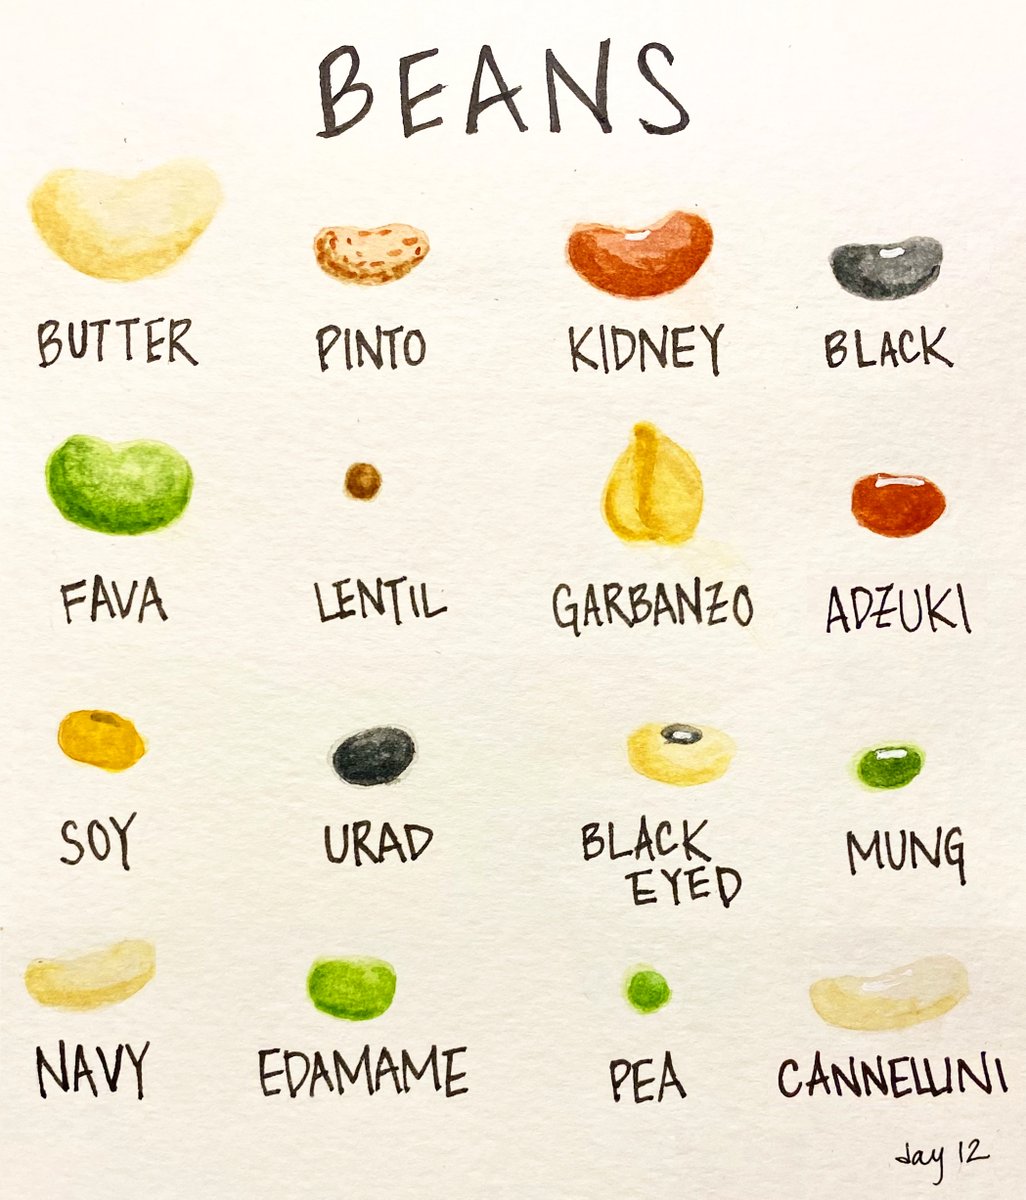 so many reasons to love #beans: 
😋 delicious + healthy
🌬️low #carbon footprint (100x LESS #emissions per gram of protein than beef)
💧water-efficient
🌱improve soil/water quality
🌈huge variety

check out @beansishow to learn more!

#foodsystems #sustainability #climatechange